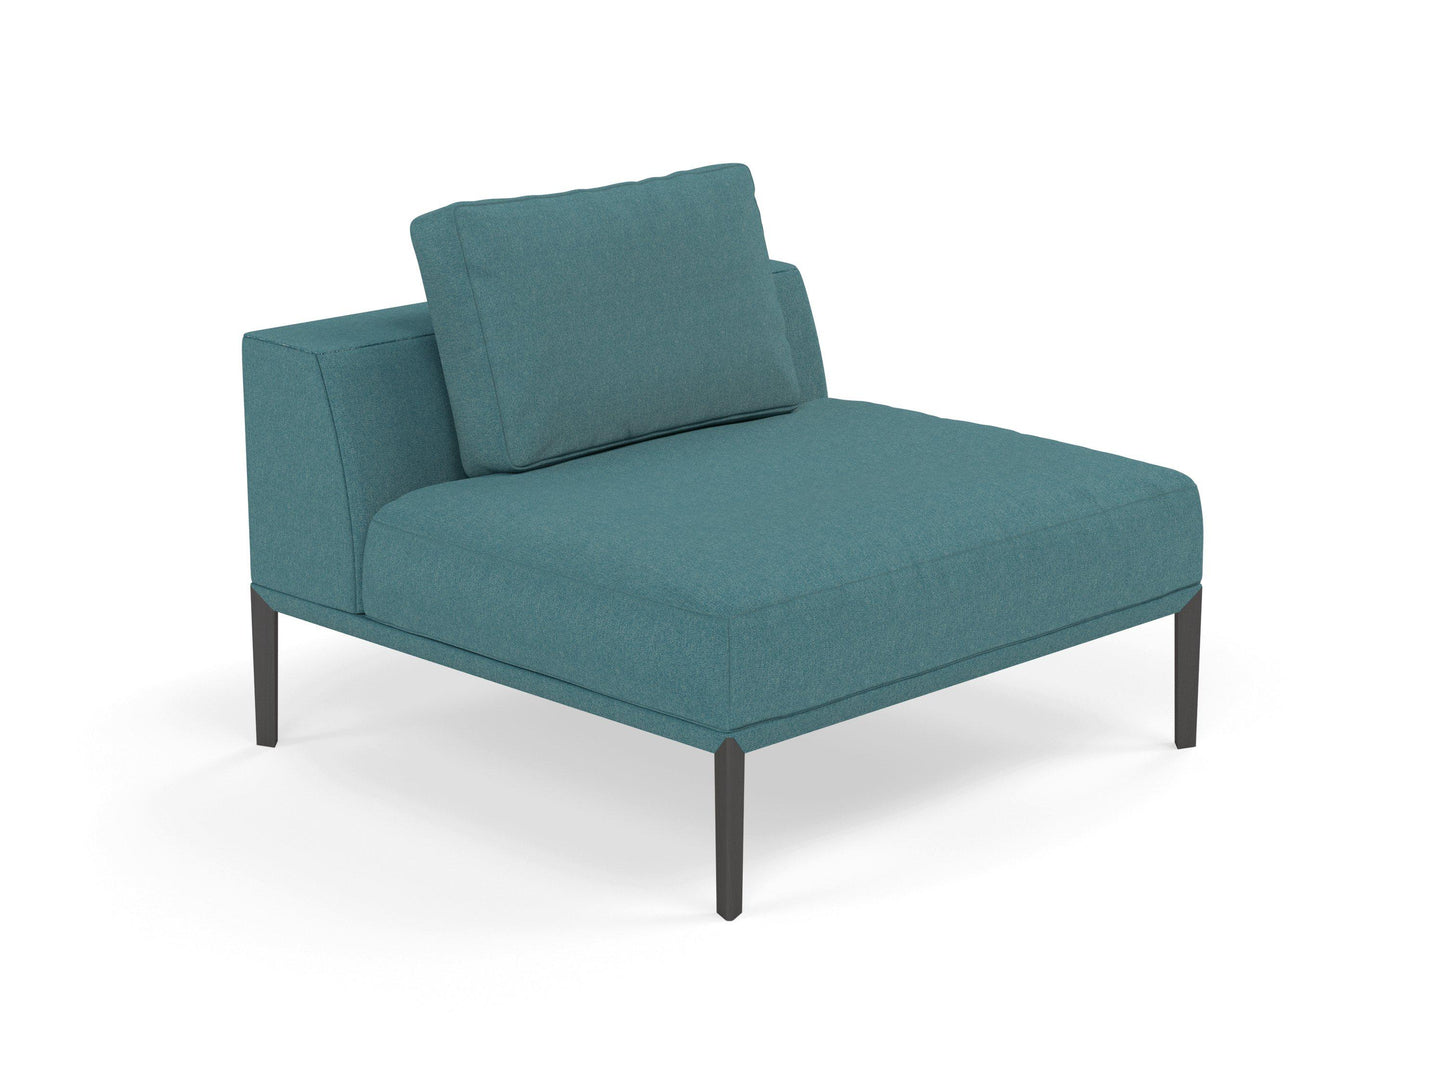 Modern Armchair 1 Seater Sofa without armrests in Teal Blue Fabric-Distinct Designs (London) Ltd